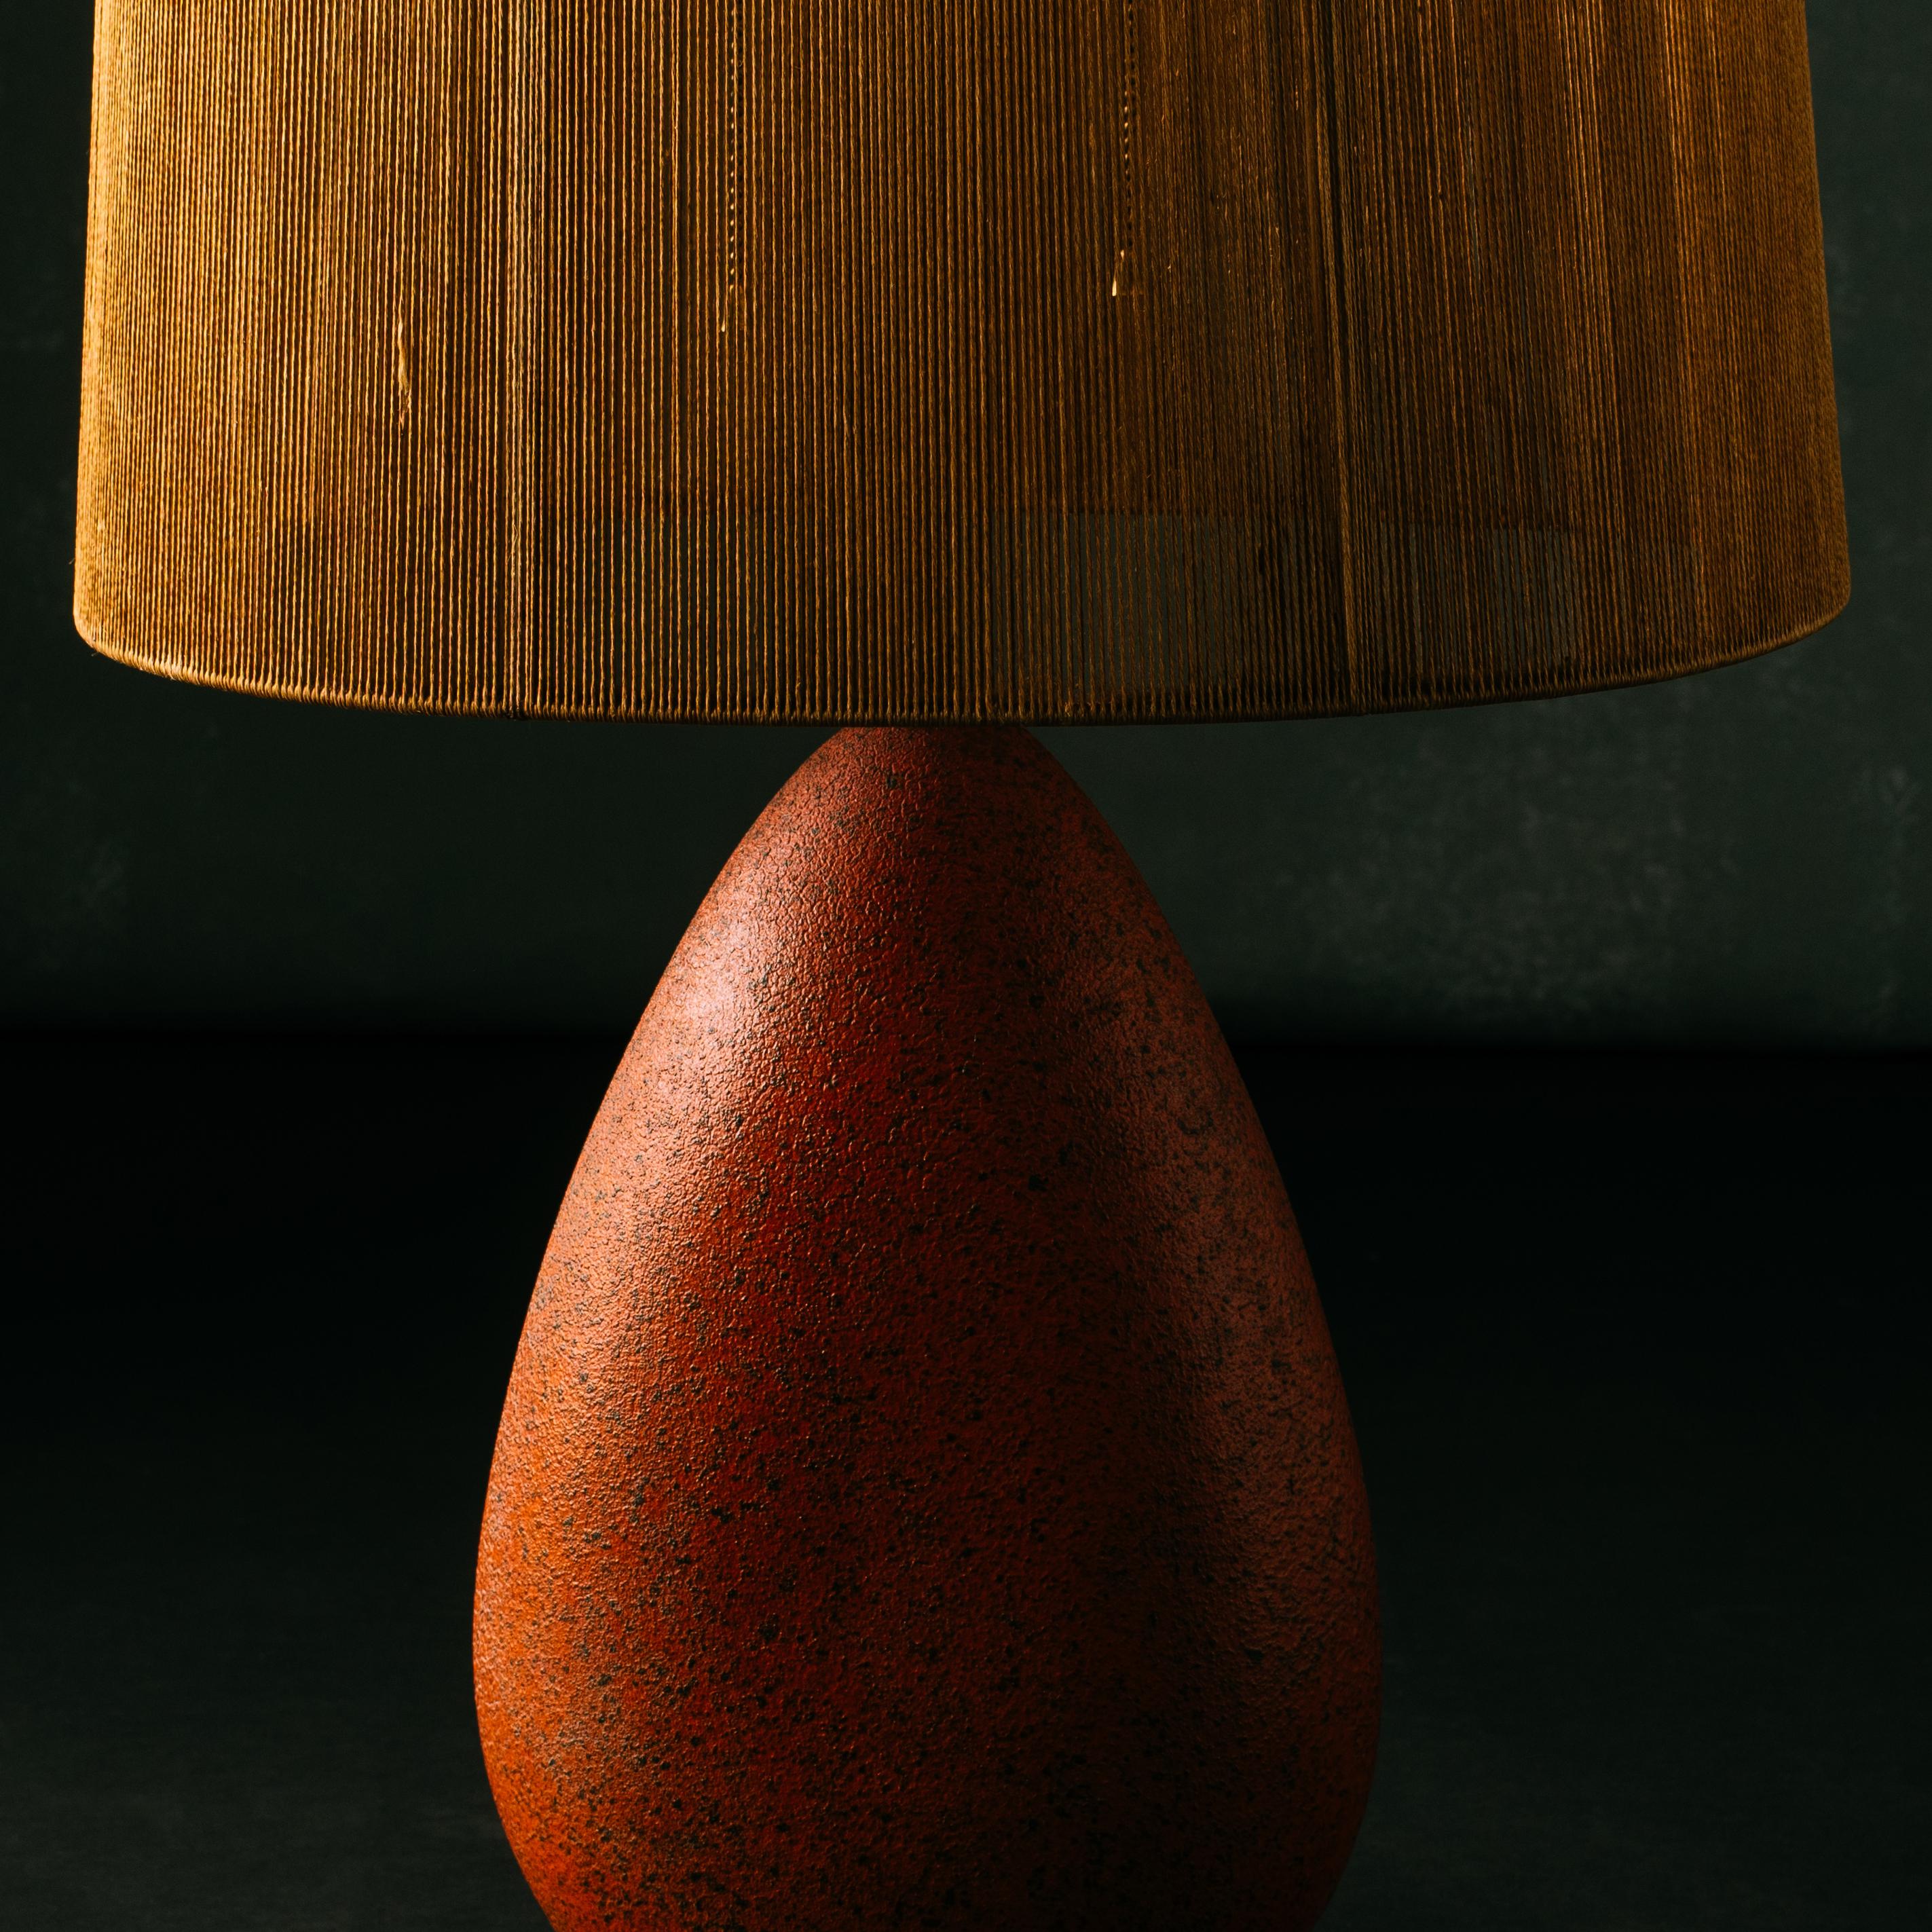 American Modernist Ceramic Table Lamp in Brick Red Glaze and Original String Shade, 1960s For Sale